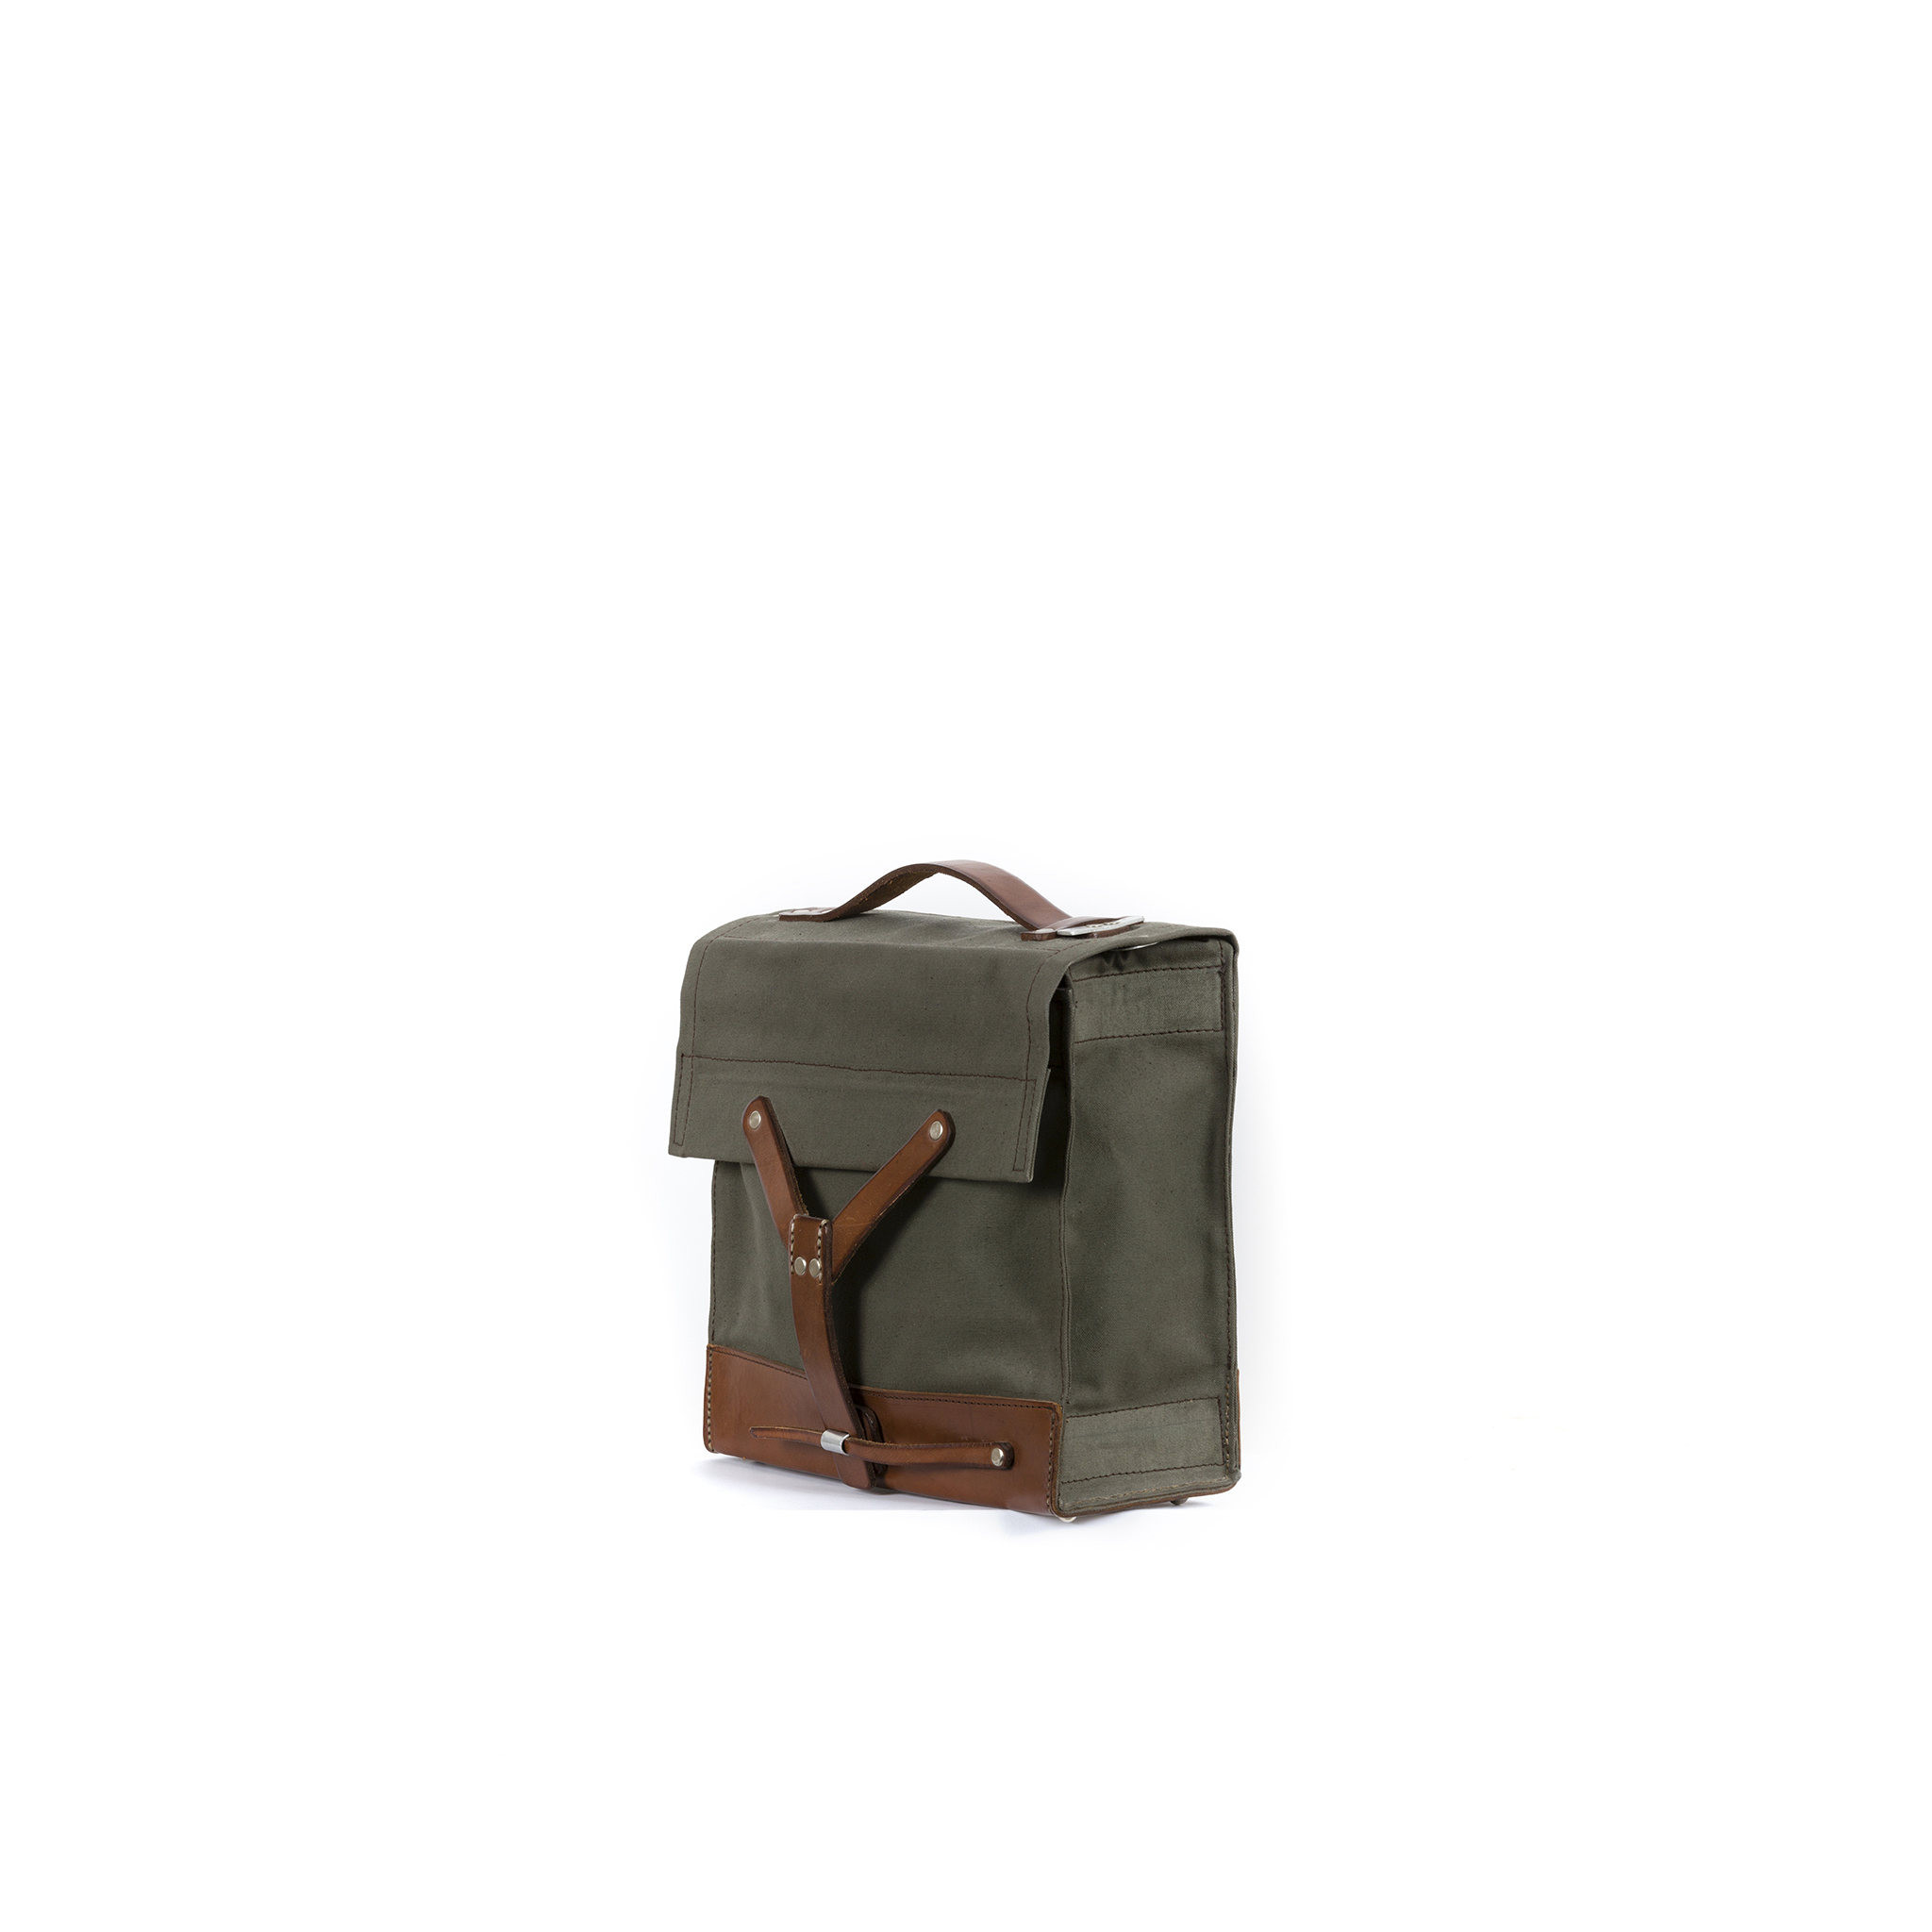 Army Box - Jute canvas and vegetable leather - Kaki and brown colors